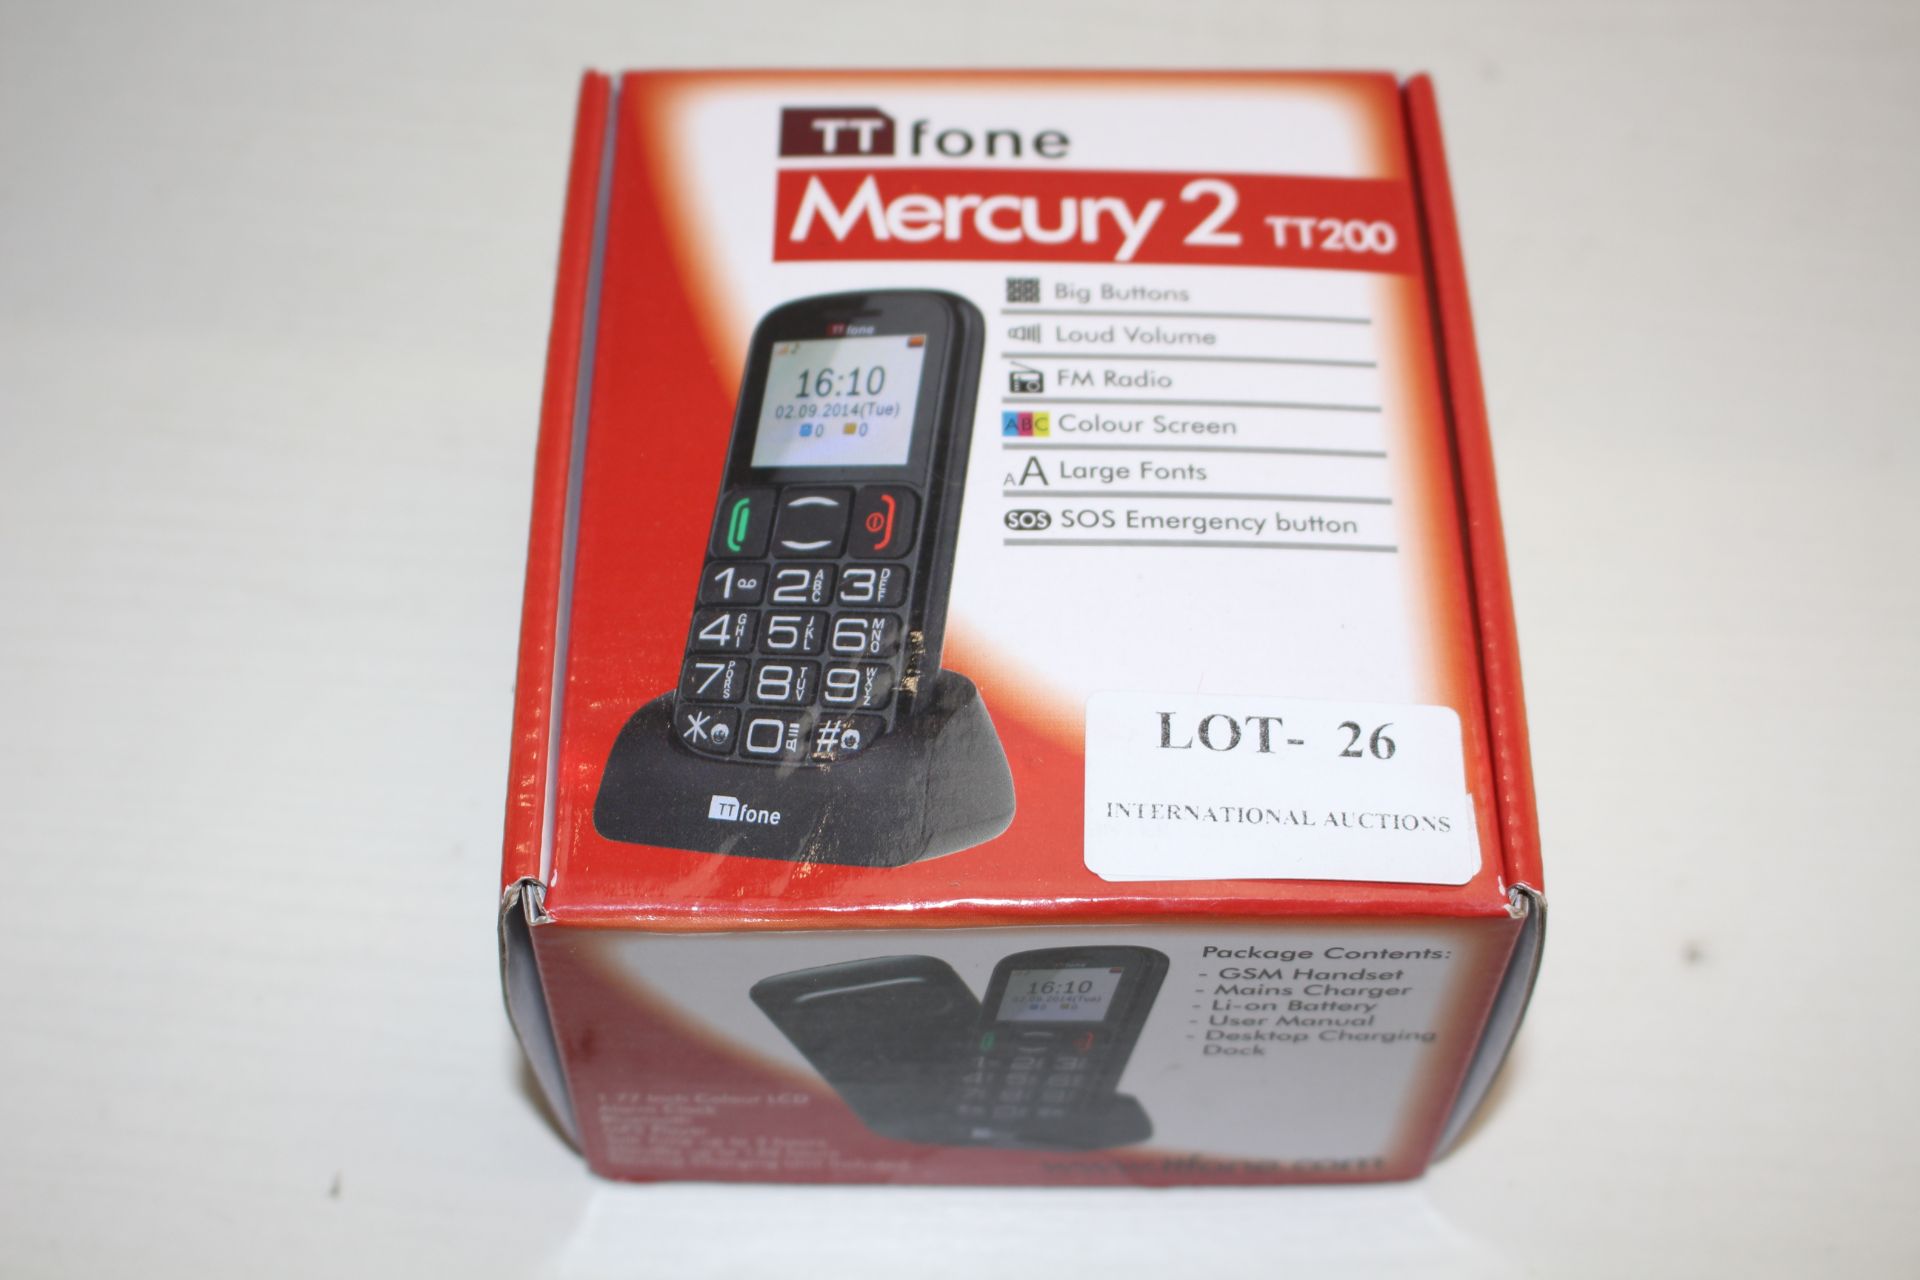 BOXED TT FONE MERCURY 2 TT200 RRP £32.99Condition ReportAppraisal Available on Request- All Items